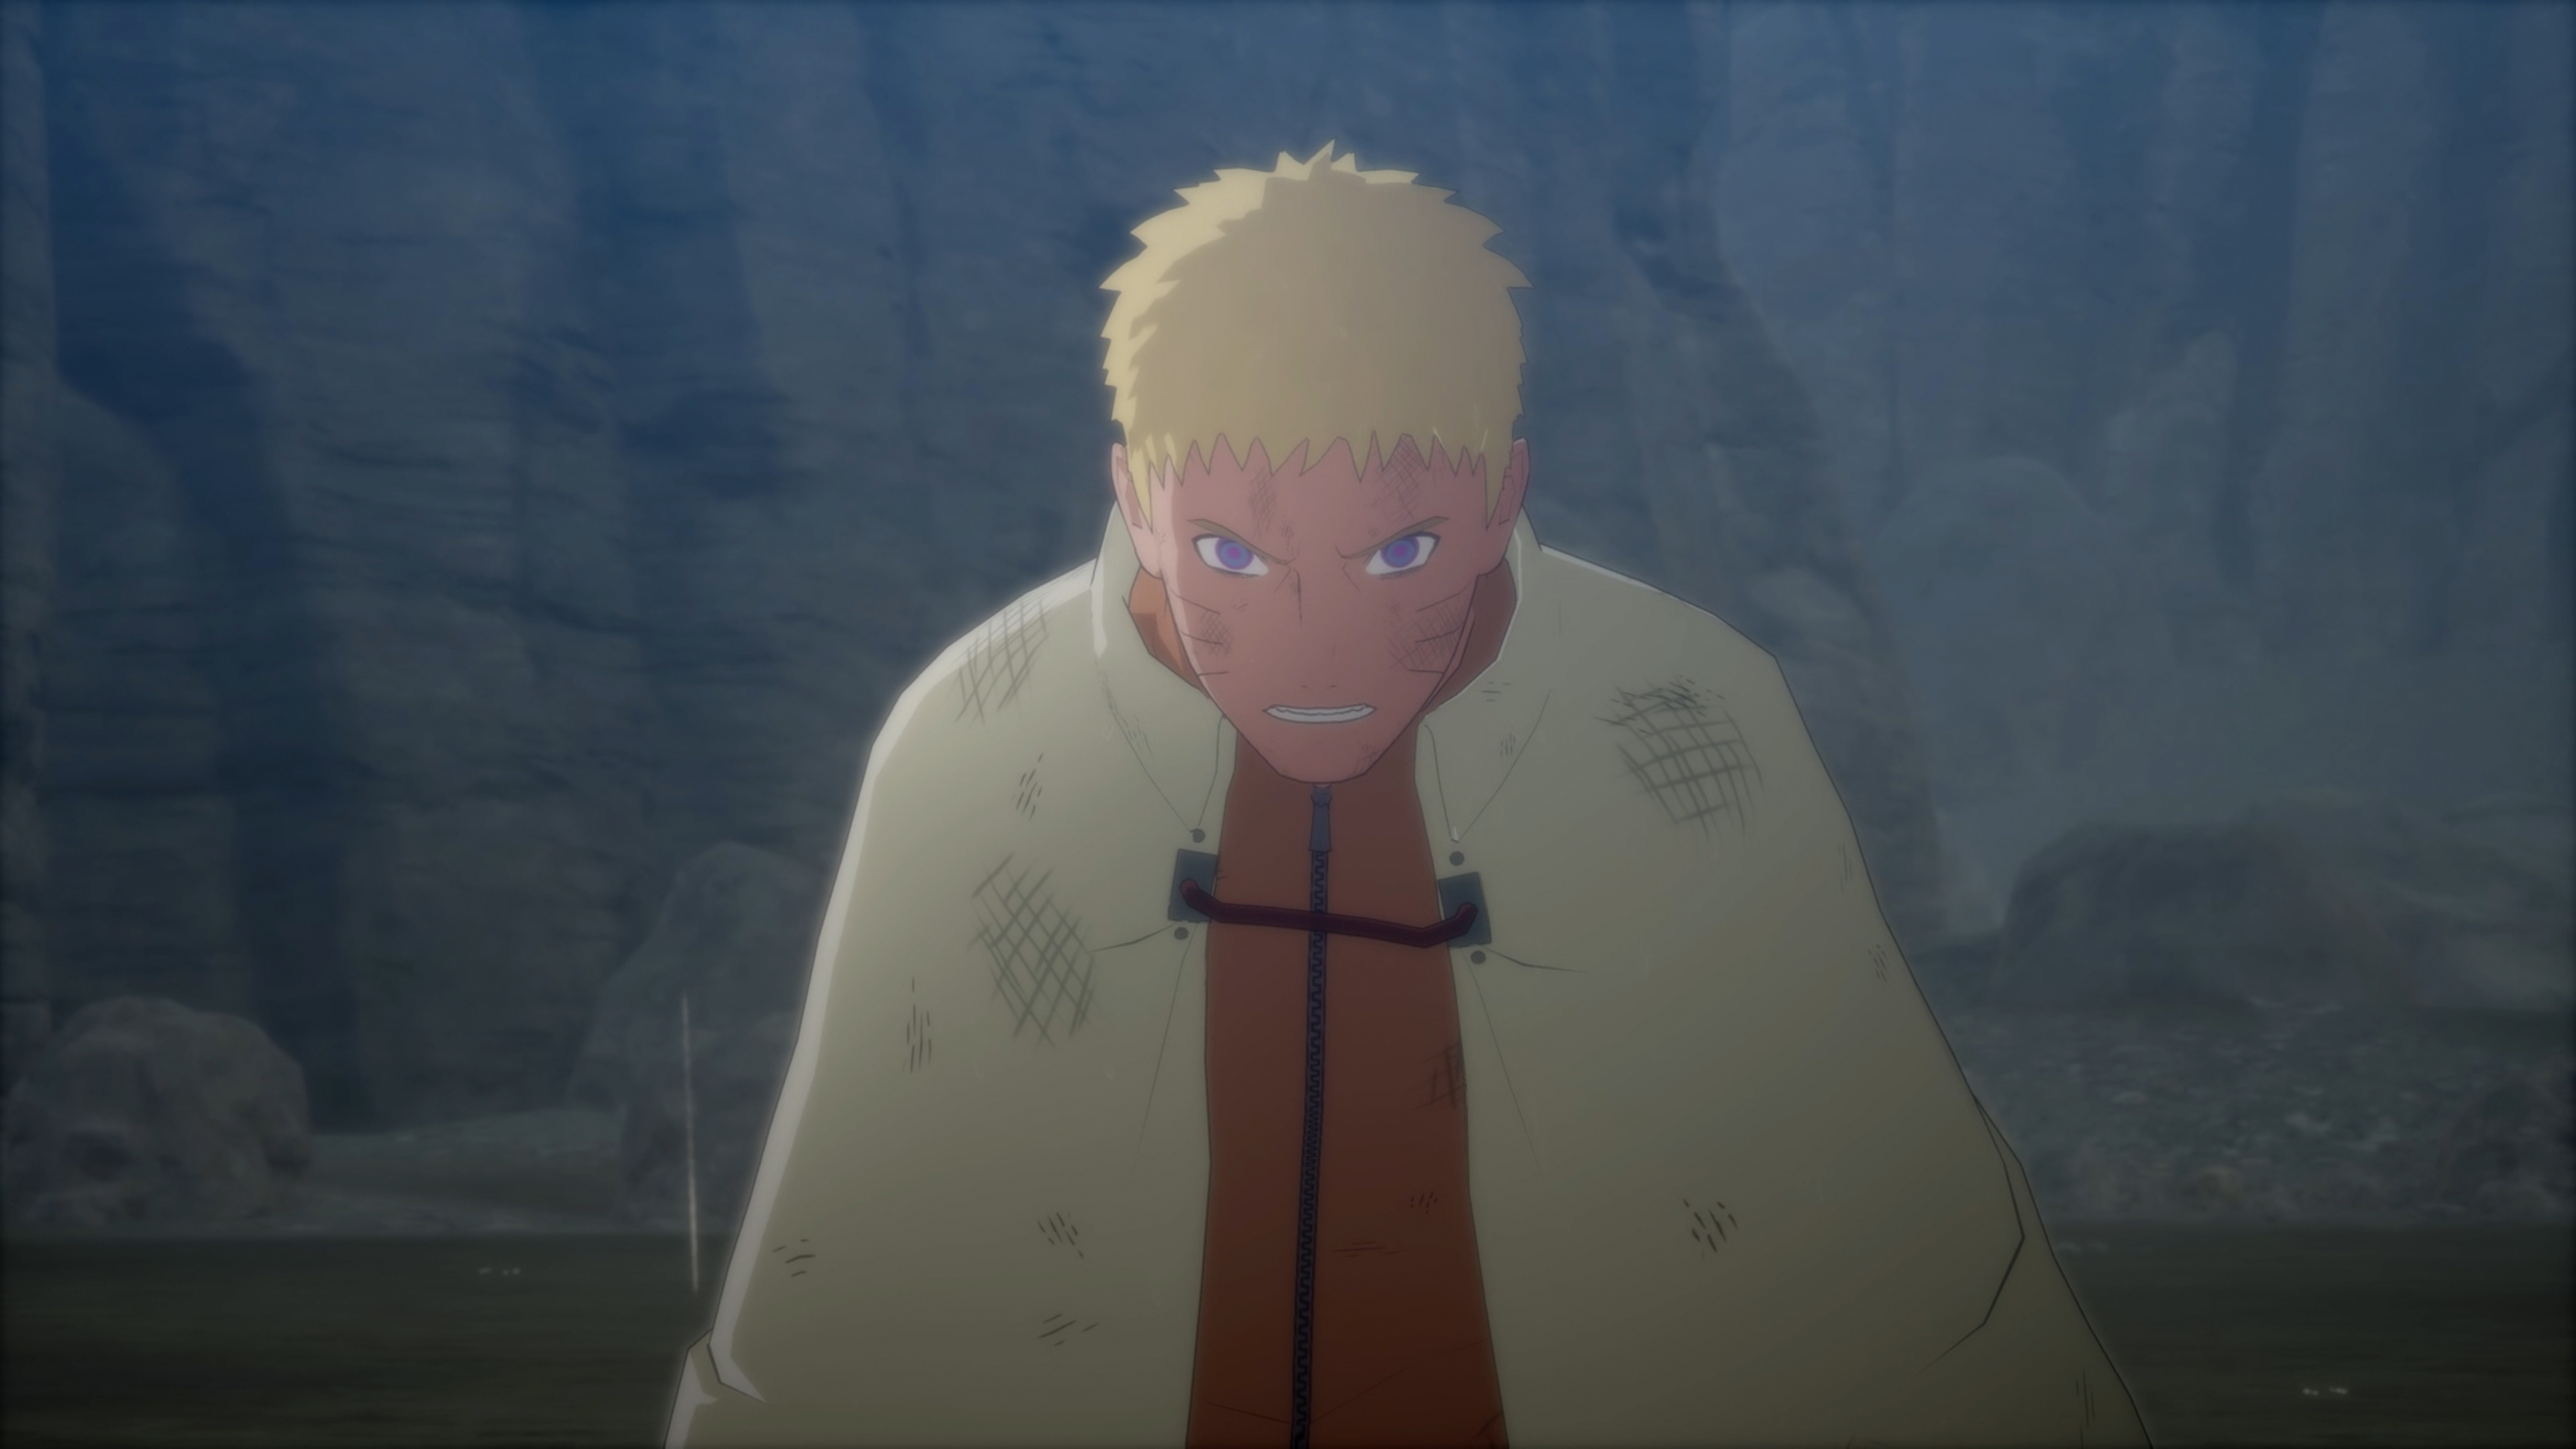 Naruto x Boruto: Ultimate Ninja Storm Connections Gets Special Story Mode  Trailer and Original Characters - QooApp News